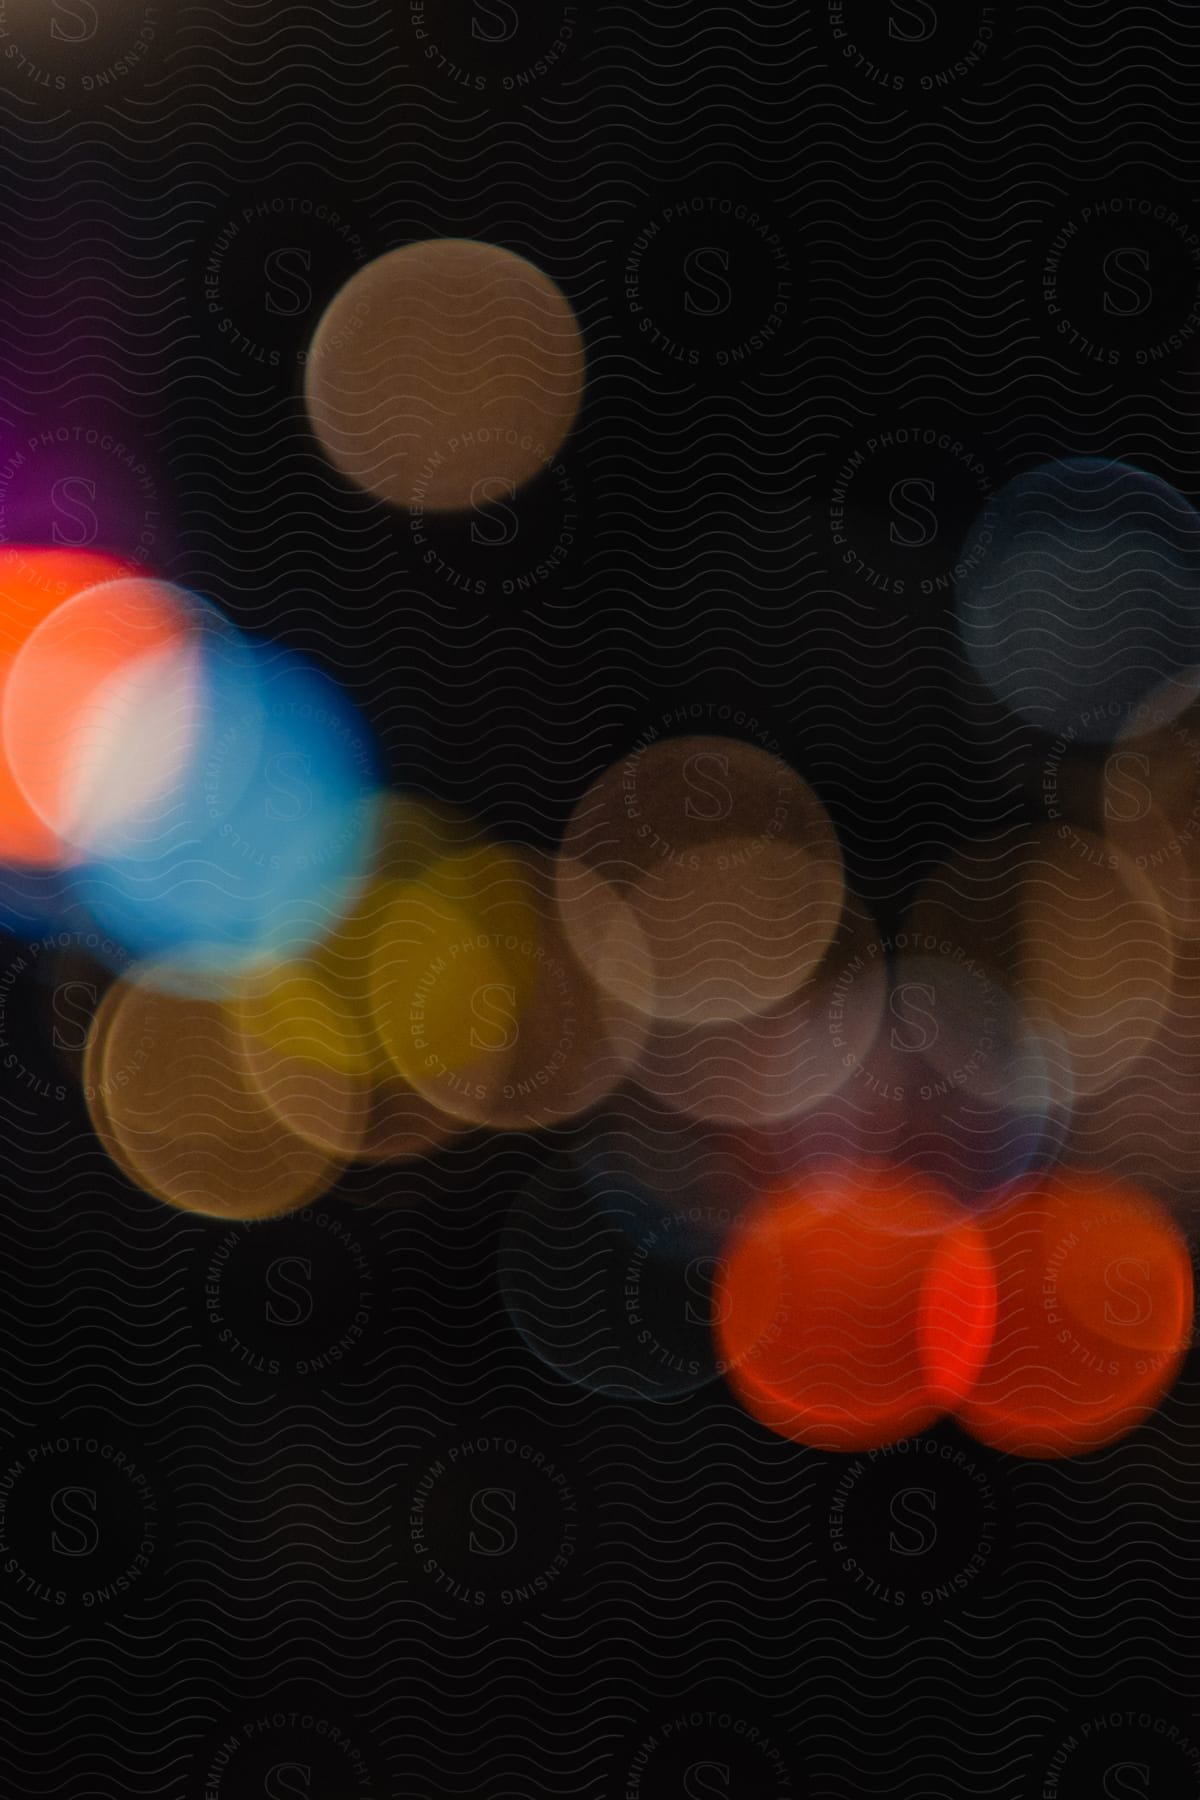 Circles of colorful lights overlaid on each other against a black background